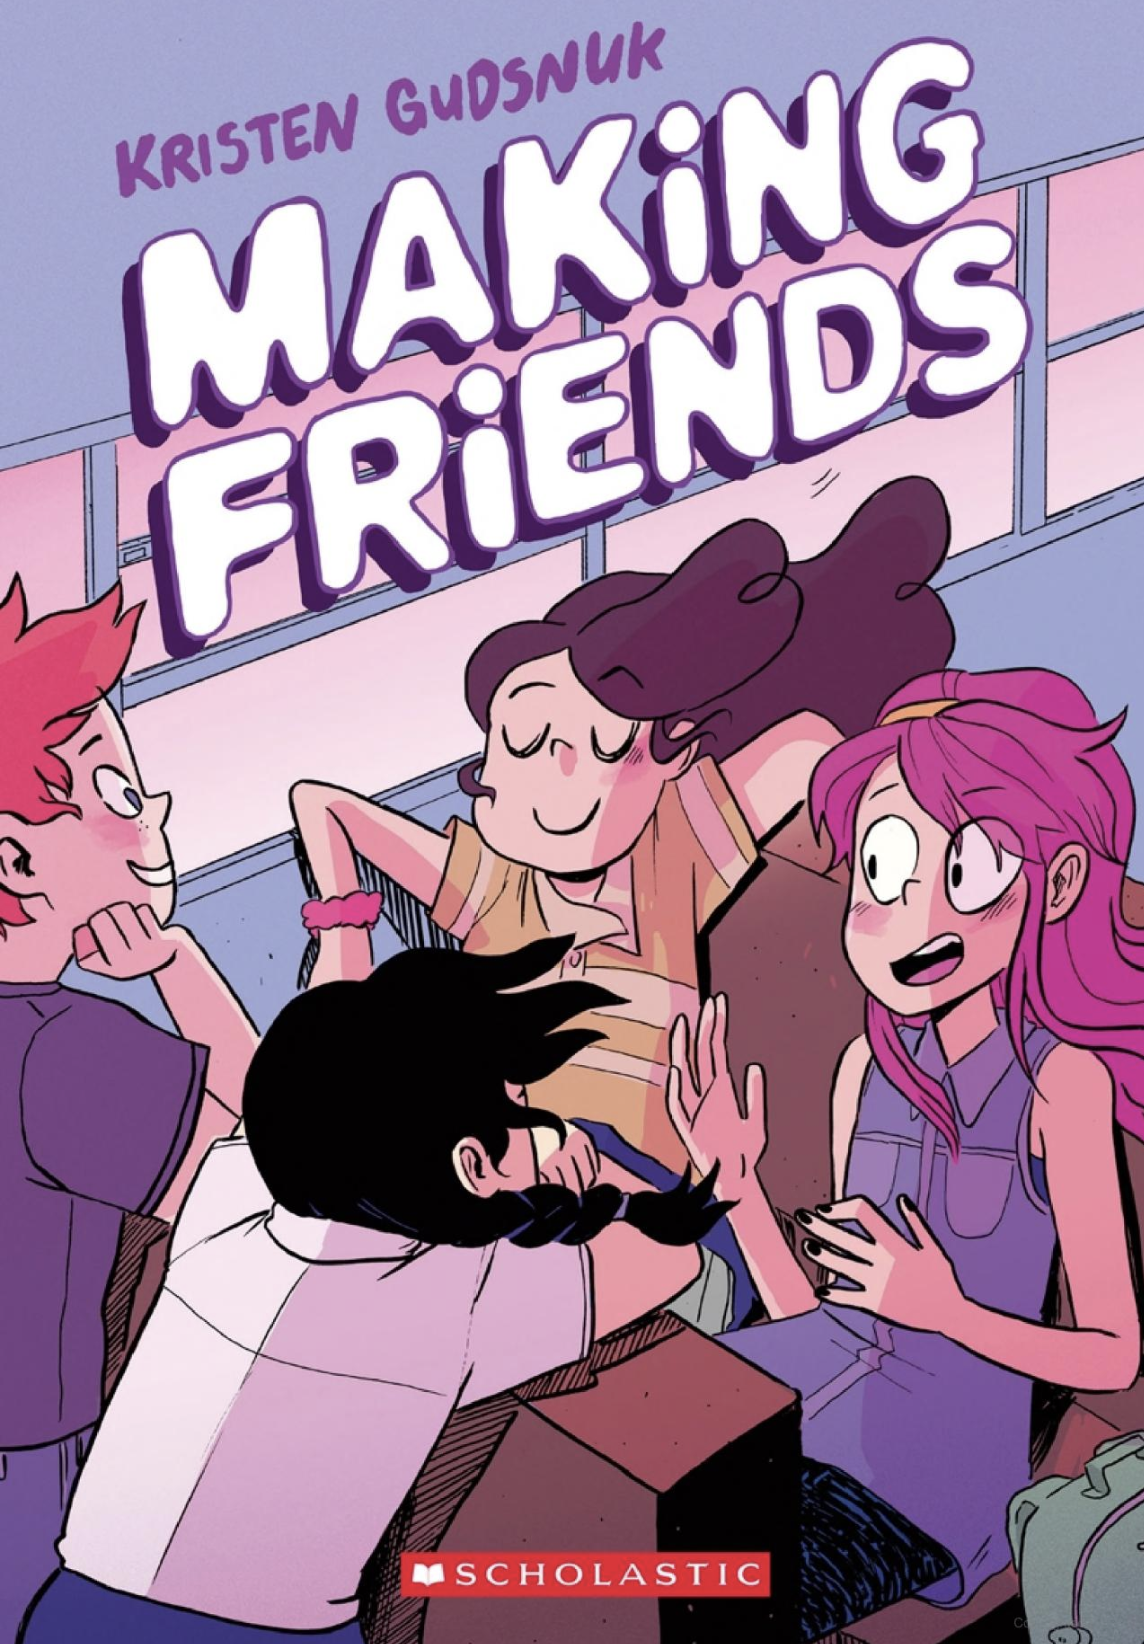 Book cover of the graphic novel "Making Friends" by Kristen Gudsnuk, the title written in a white but purple-outline font, with 4 teens engaging below the title, drawn in vibrant colors.